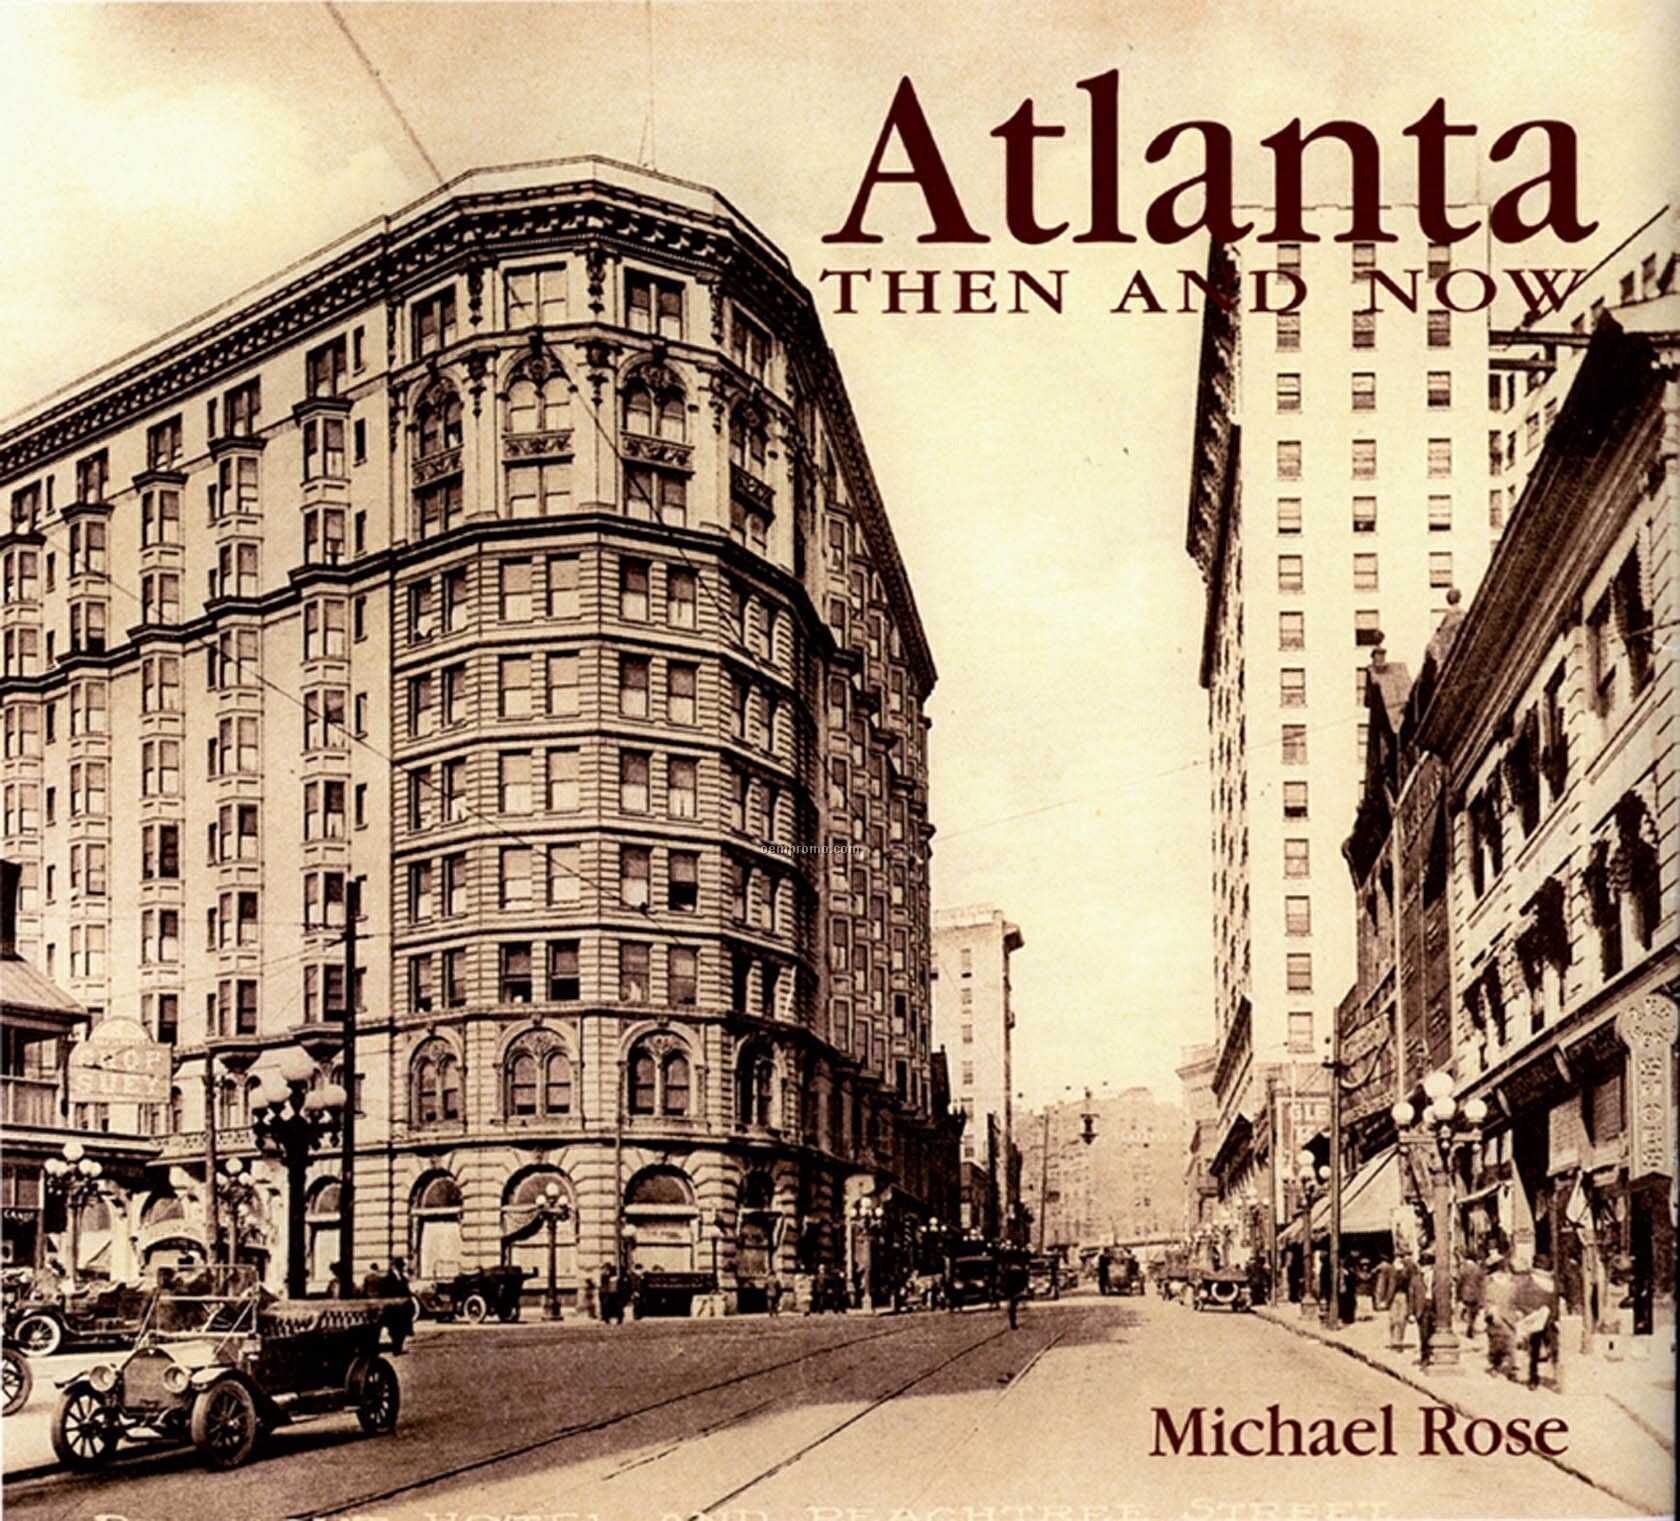 Coffee Table Gift Books - Atlanta Then And Now - Compact Edition